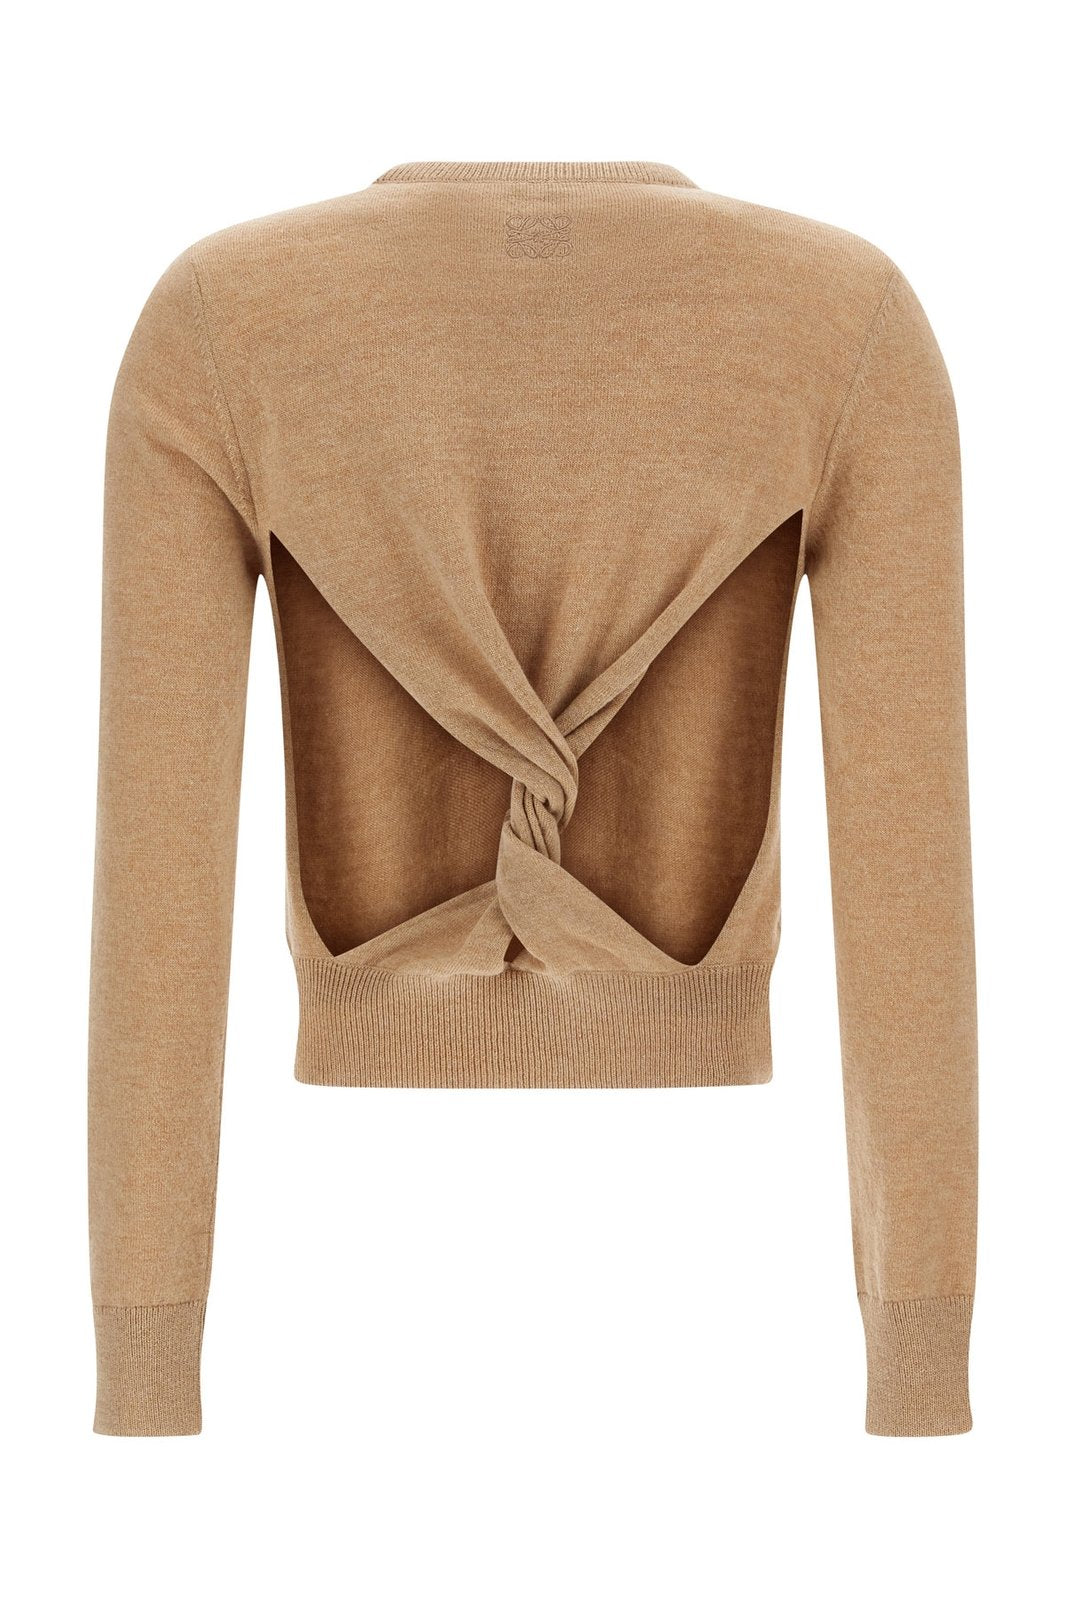 Loewe Twisted Cut-Out Back Sweater